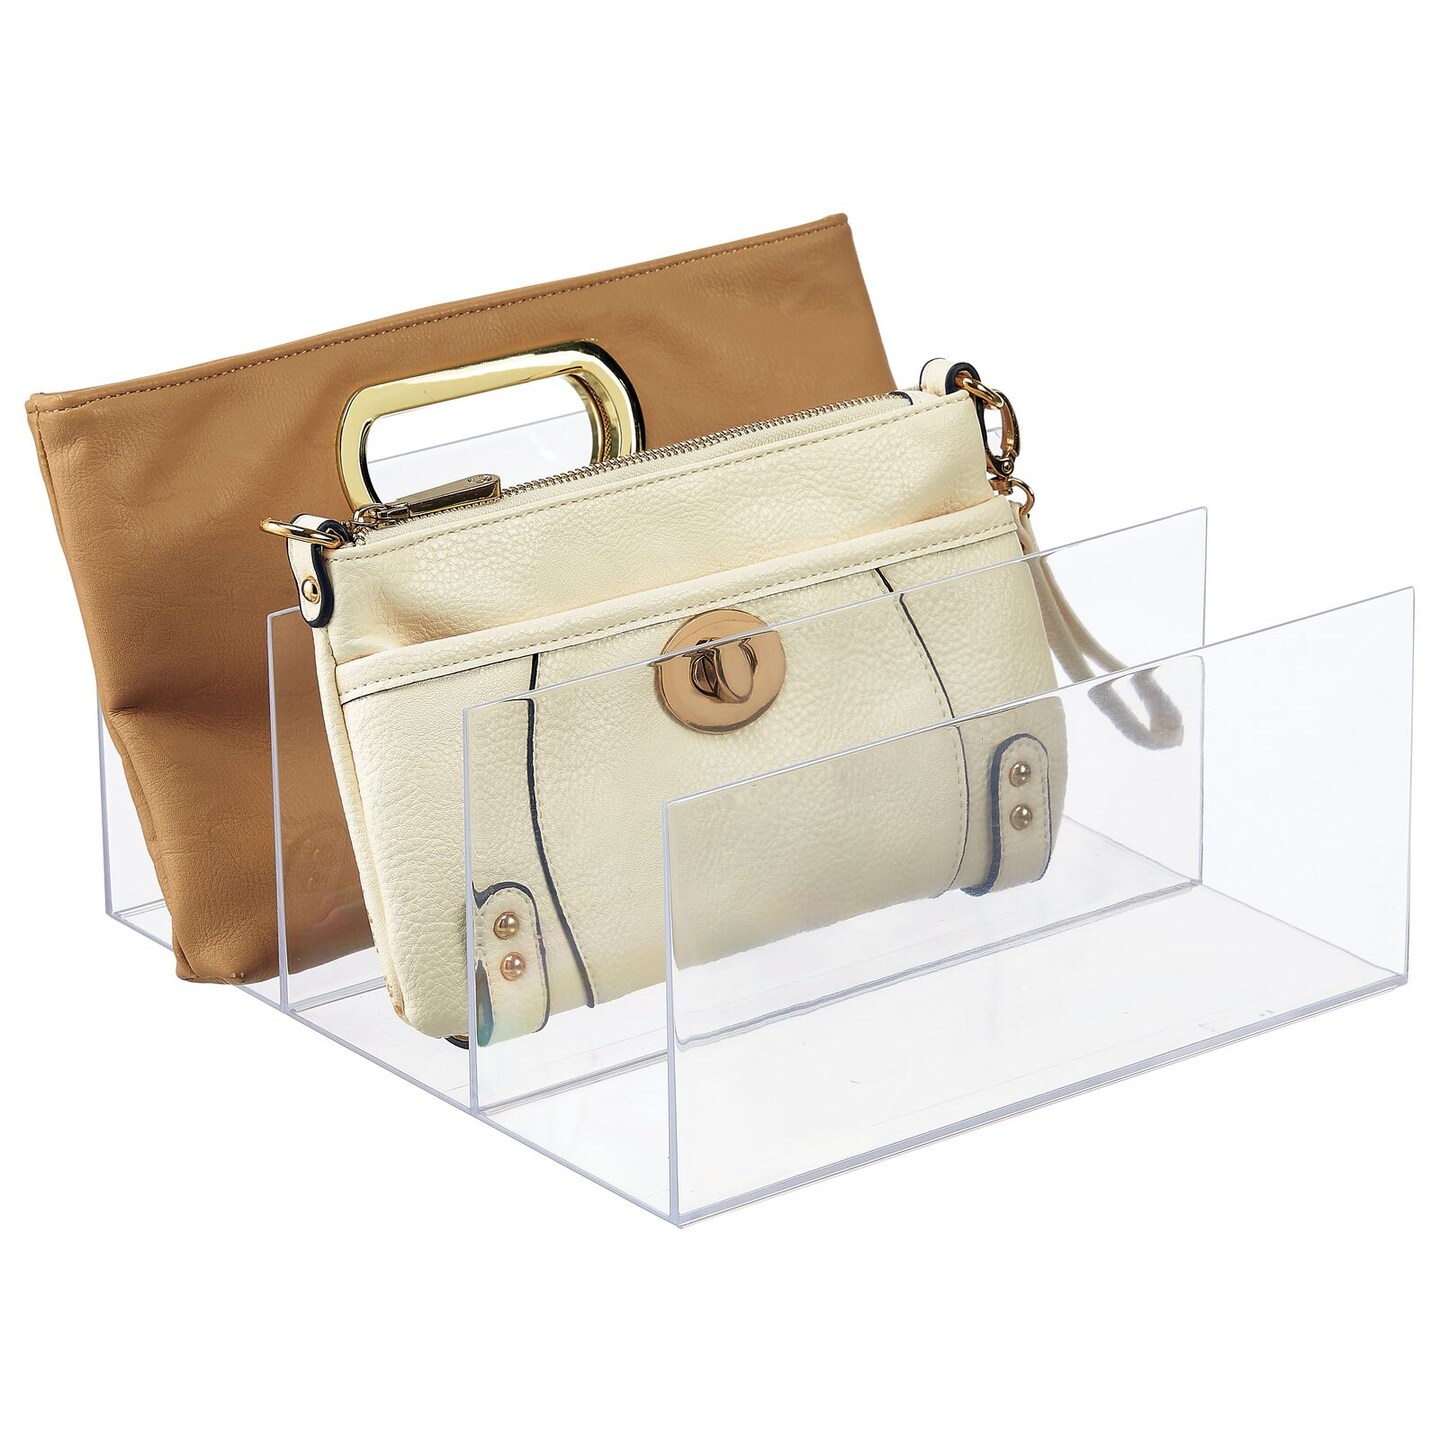 Clear Handbags & More is a supplier of clear bags and PPE supplies. – Clear- Handbags.com